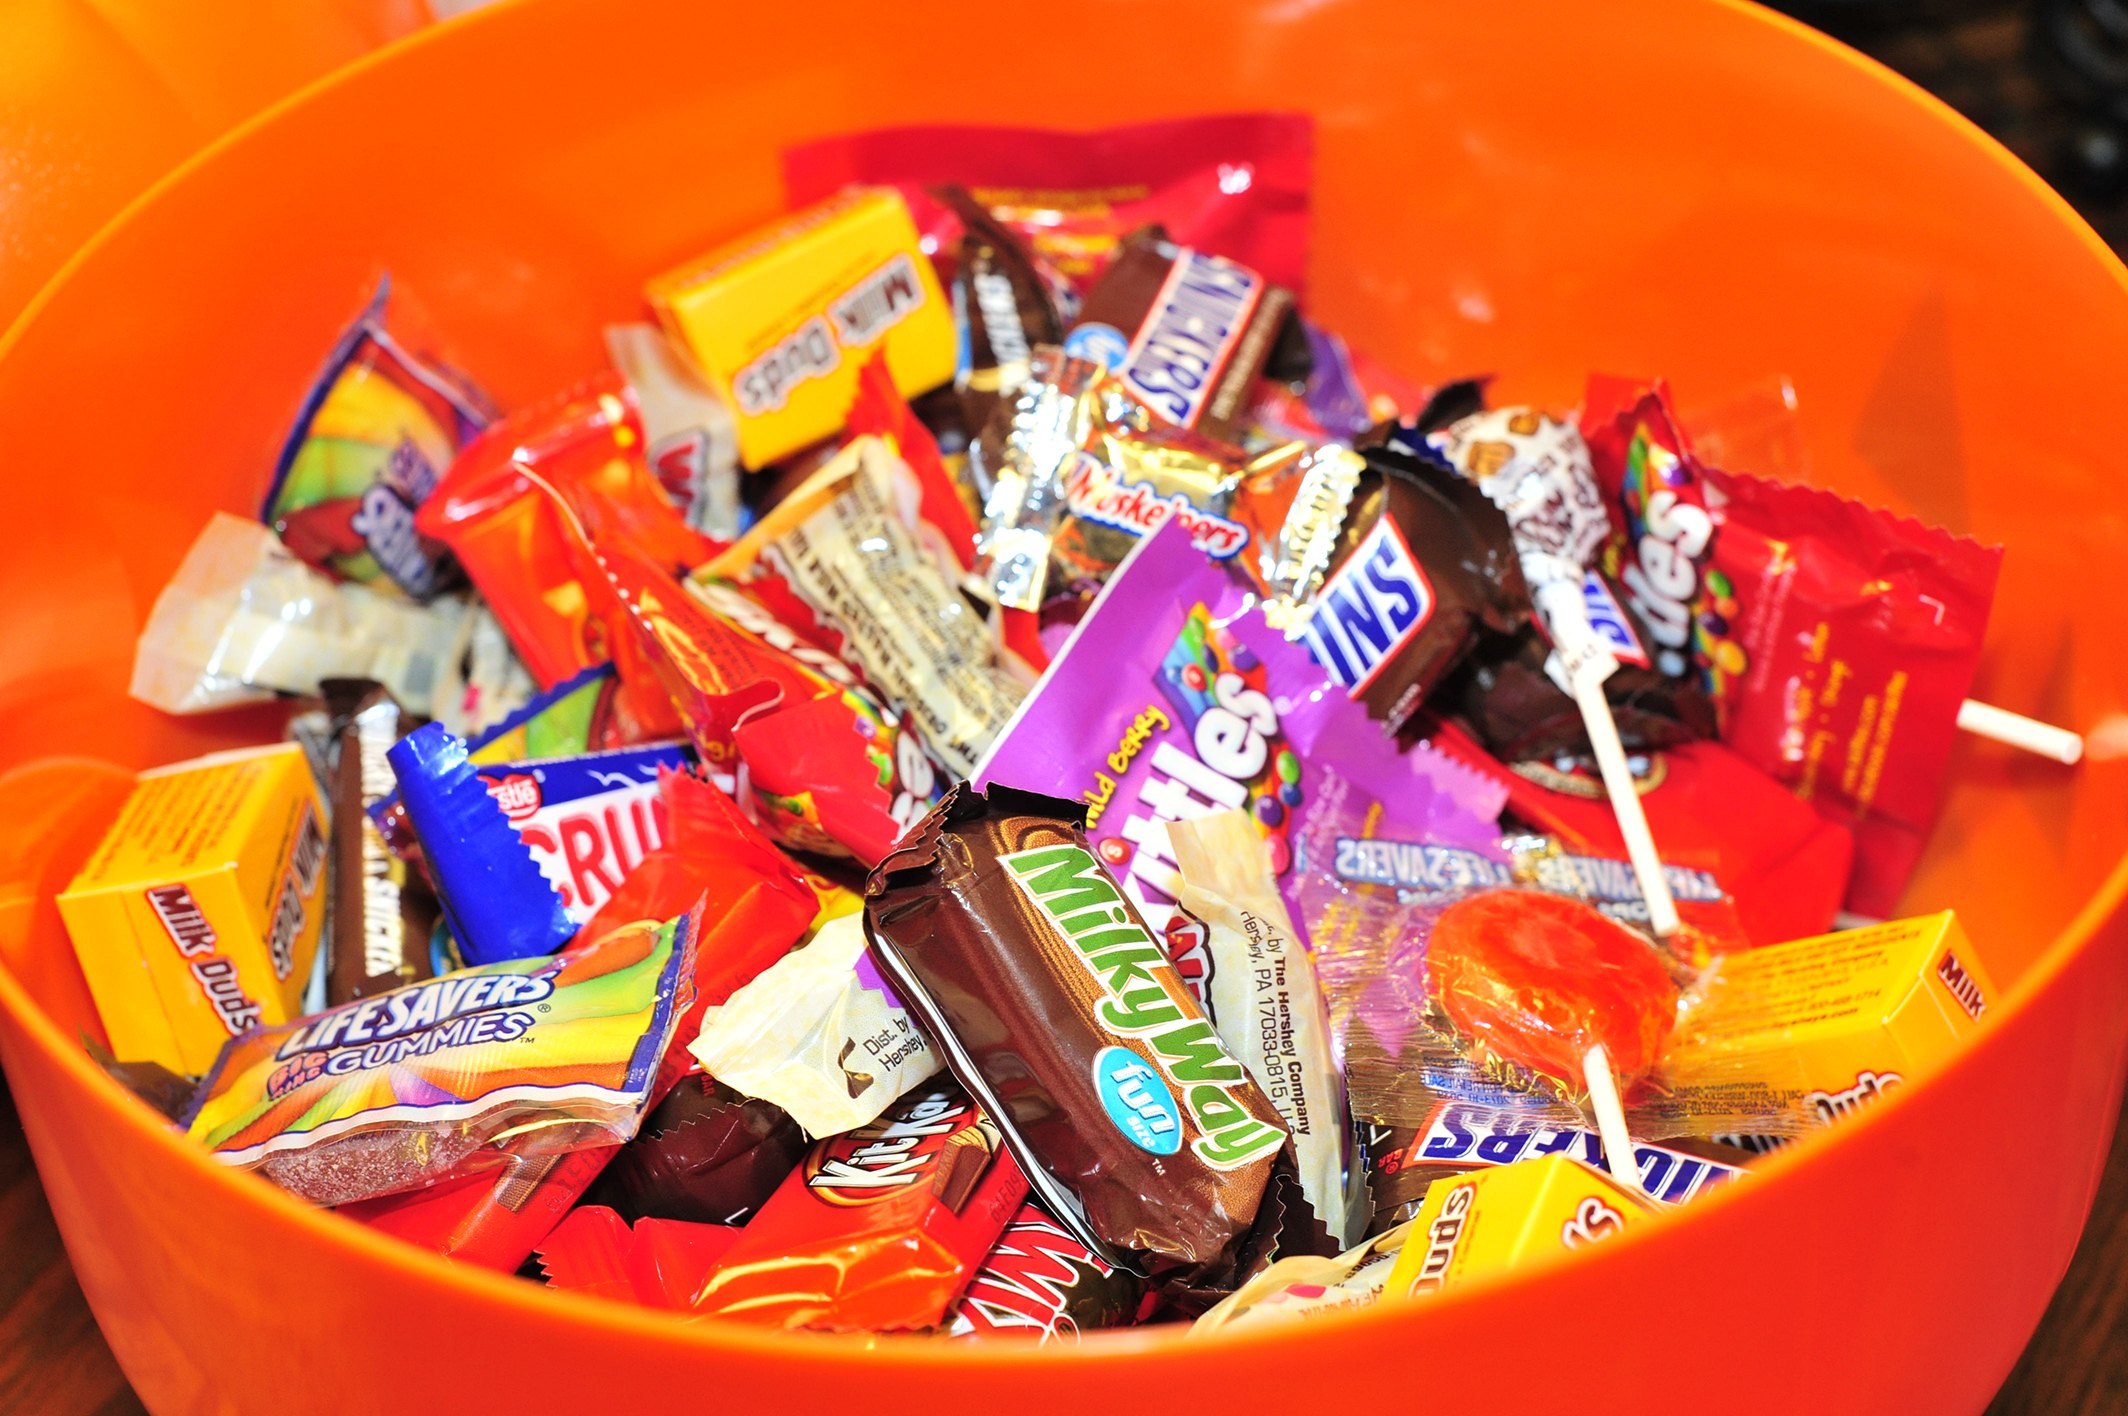 Raleigh, NC/United States- 10/31/2017: A large bowl of Halloween candy for trick-or-treaters.